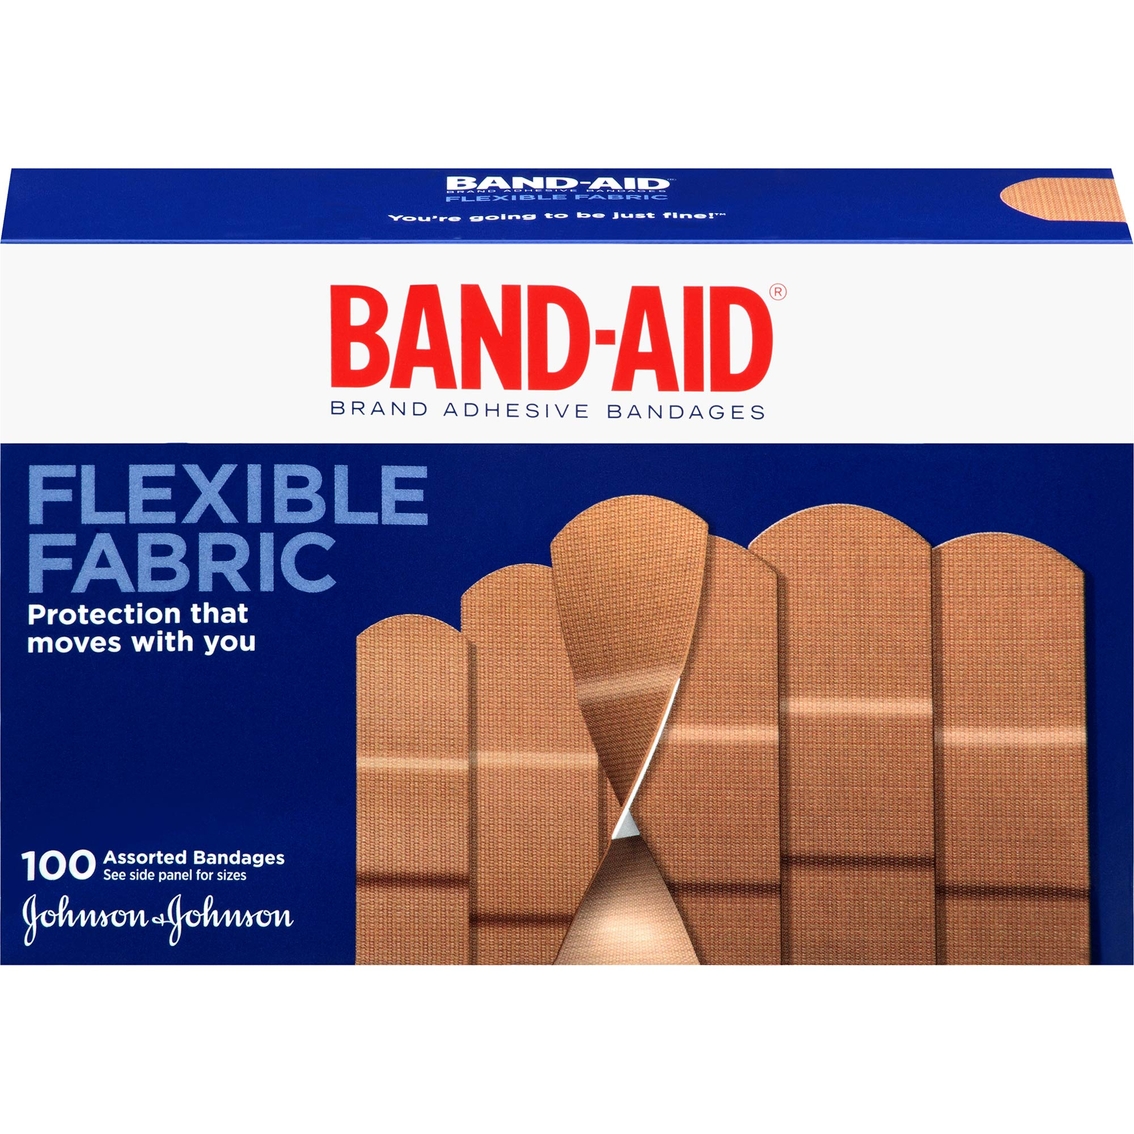 Band-aid Brand Adhesive Bandages Flexible Fabric 100 Pk., First Aid, Beauty & Health